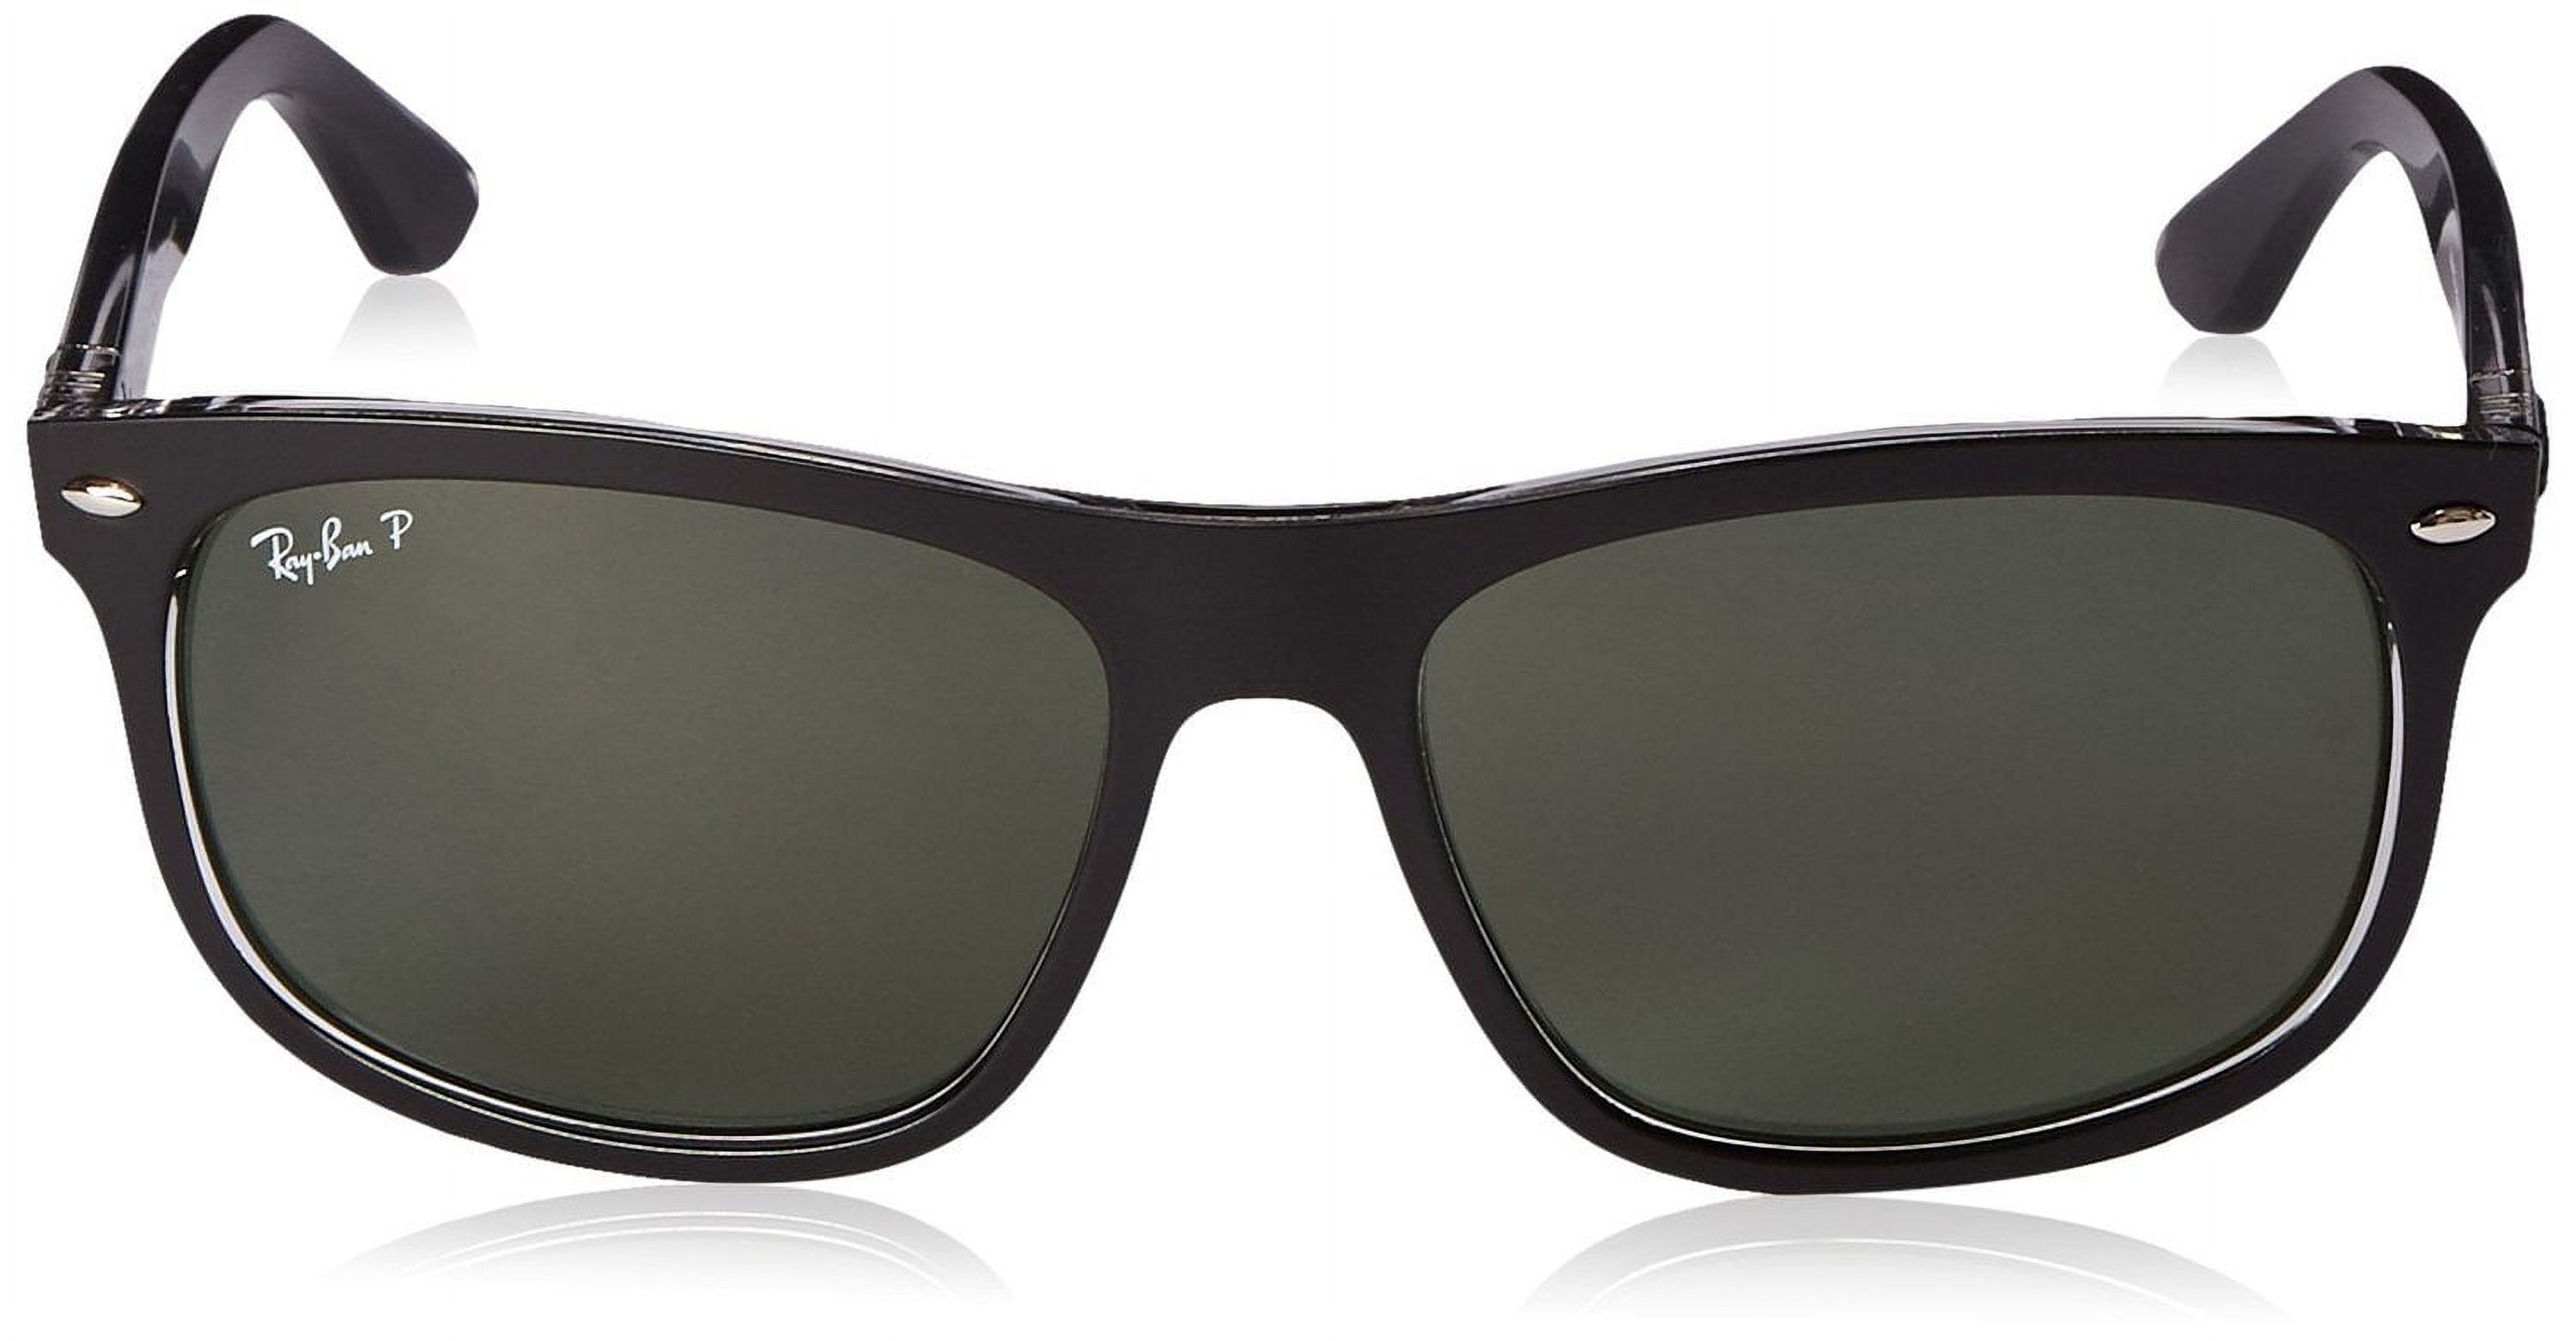 Ray Ban RB 4222 6052/9A - Black/Green Classic Polarized by Ray Ban for Men - 56-16-145 mm Sunglasses - image 2 of 3